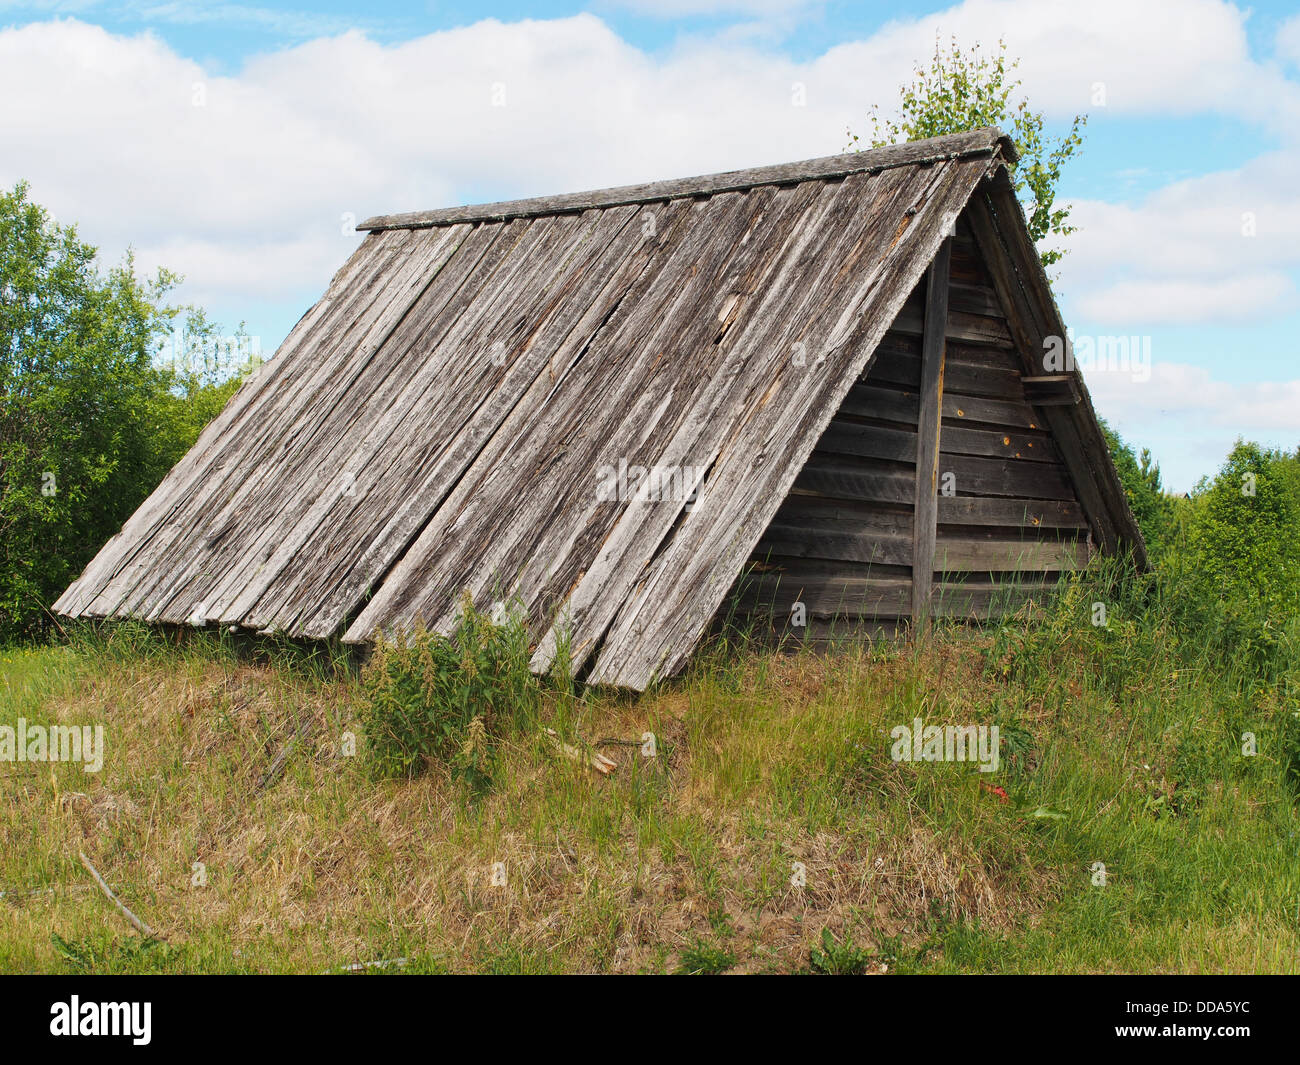 Wooden house in the village Stock Photo